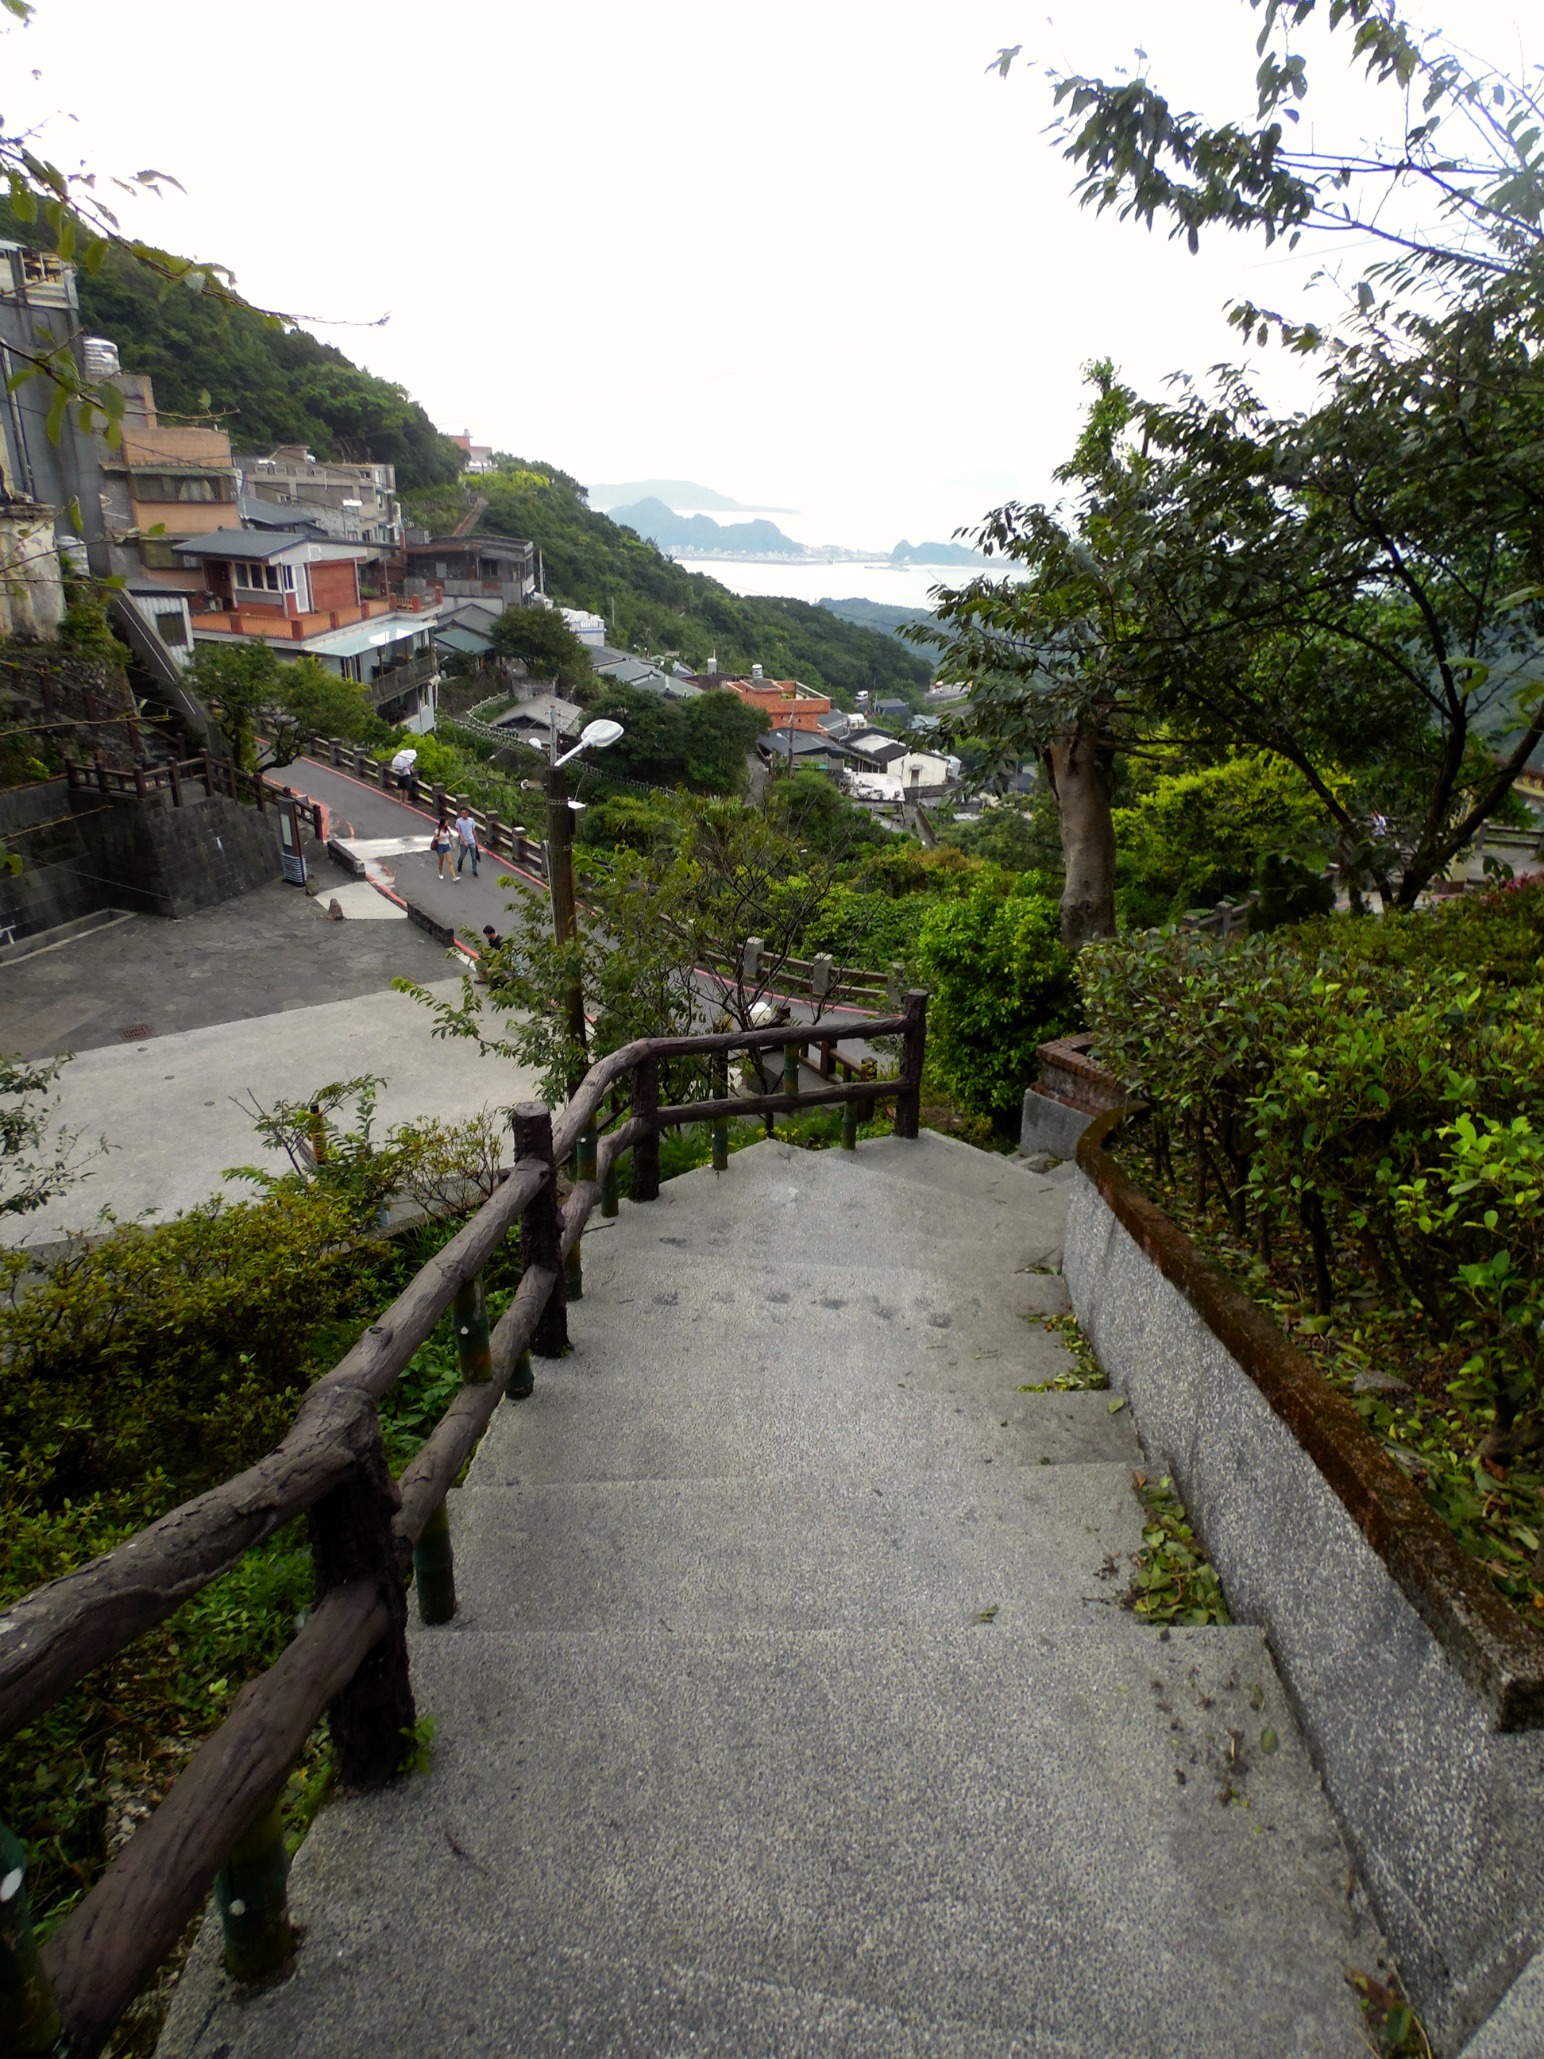 Five things to do in jiufen